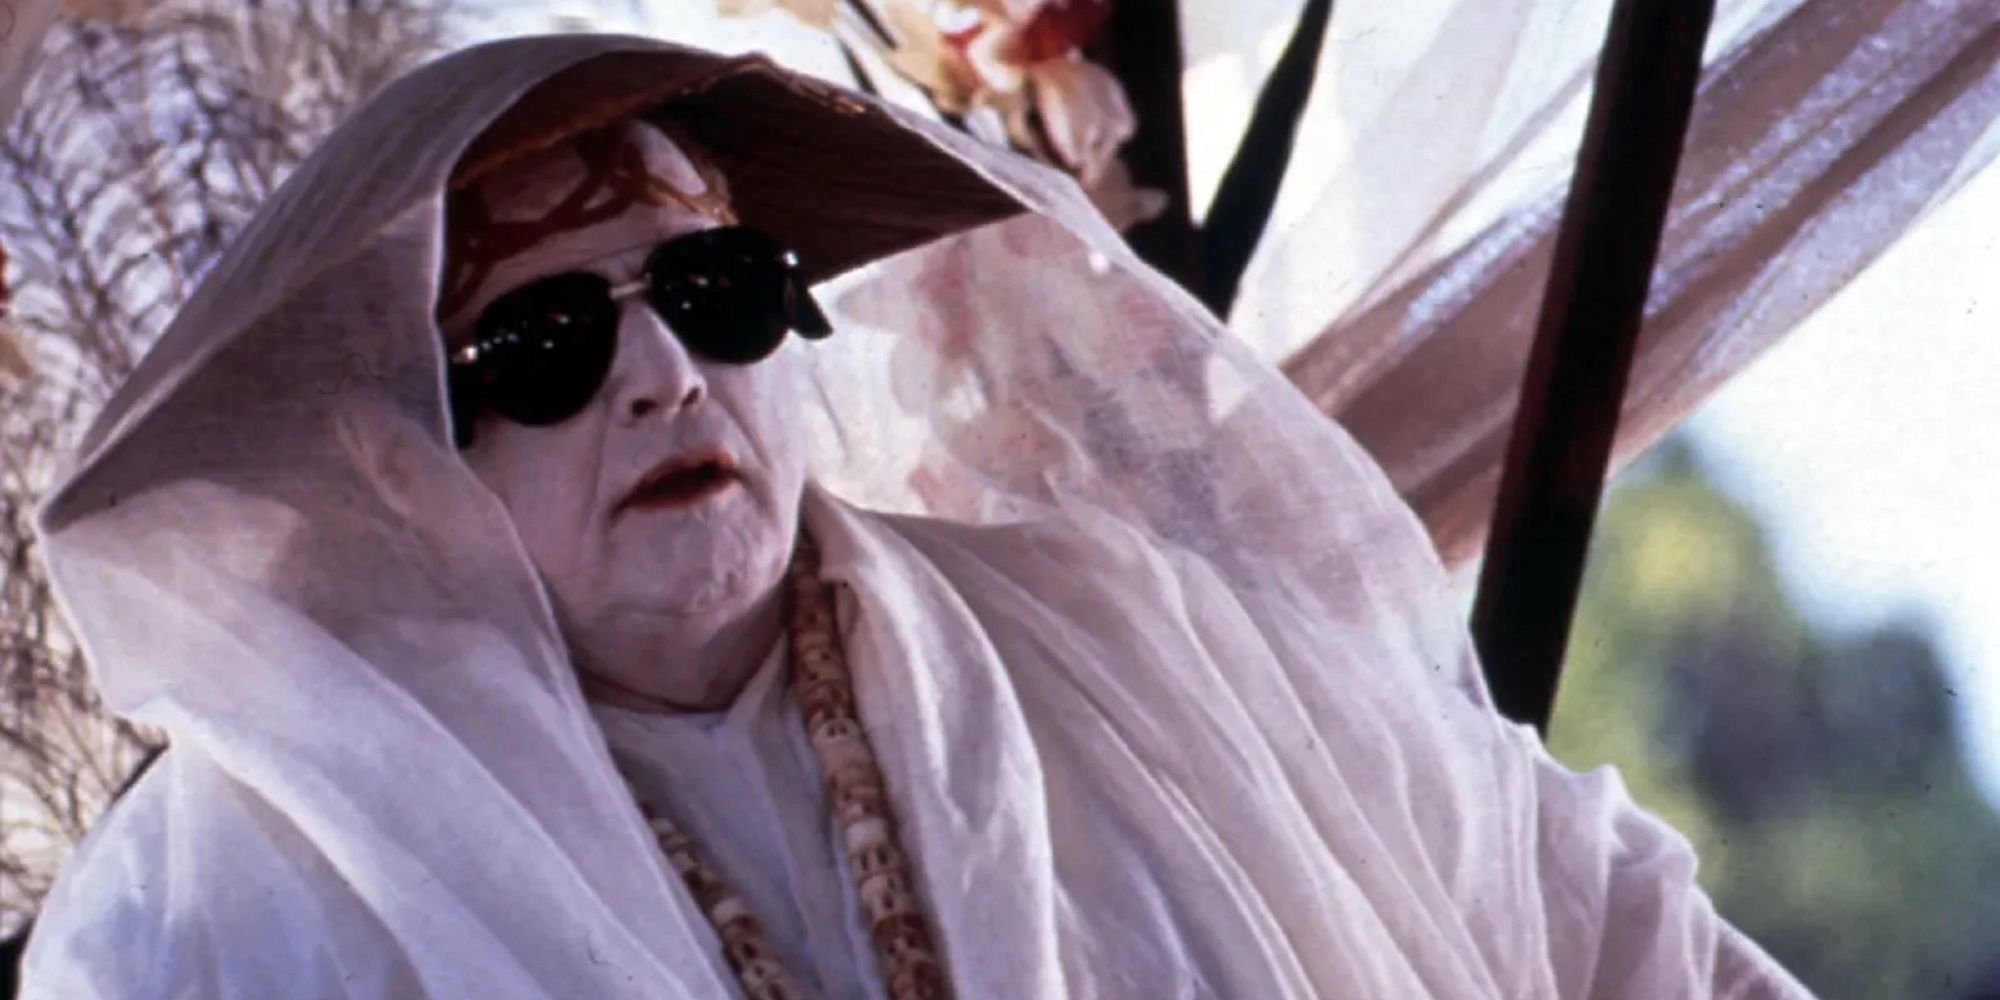 Marlon Brando as Dr. Moreau sitting under a small tent wearing a hate and white covering in The Island of Dr. Moreau